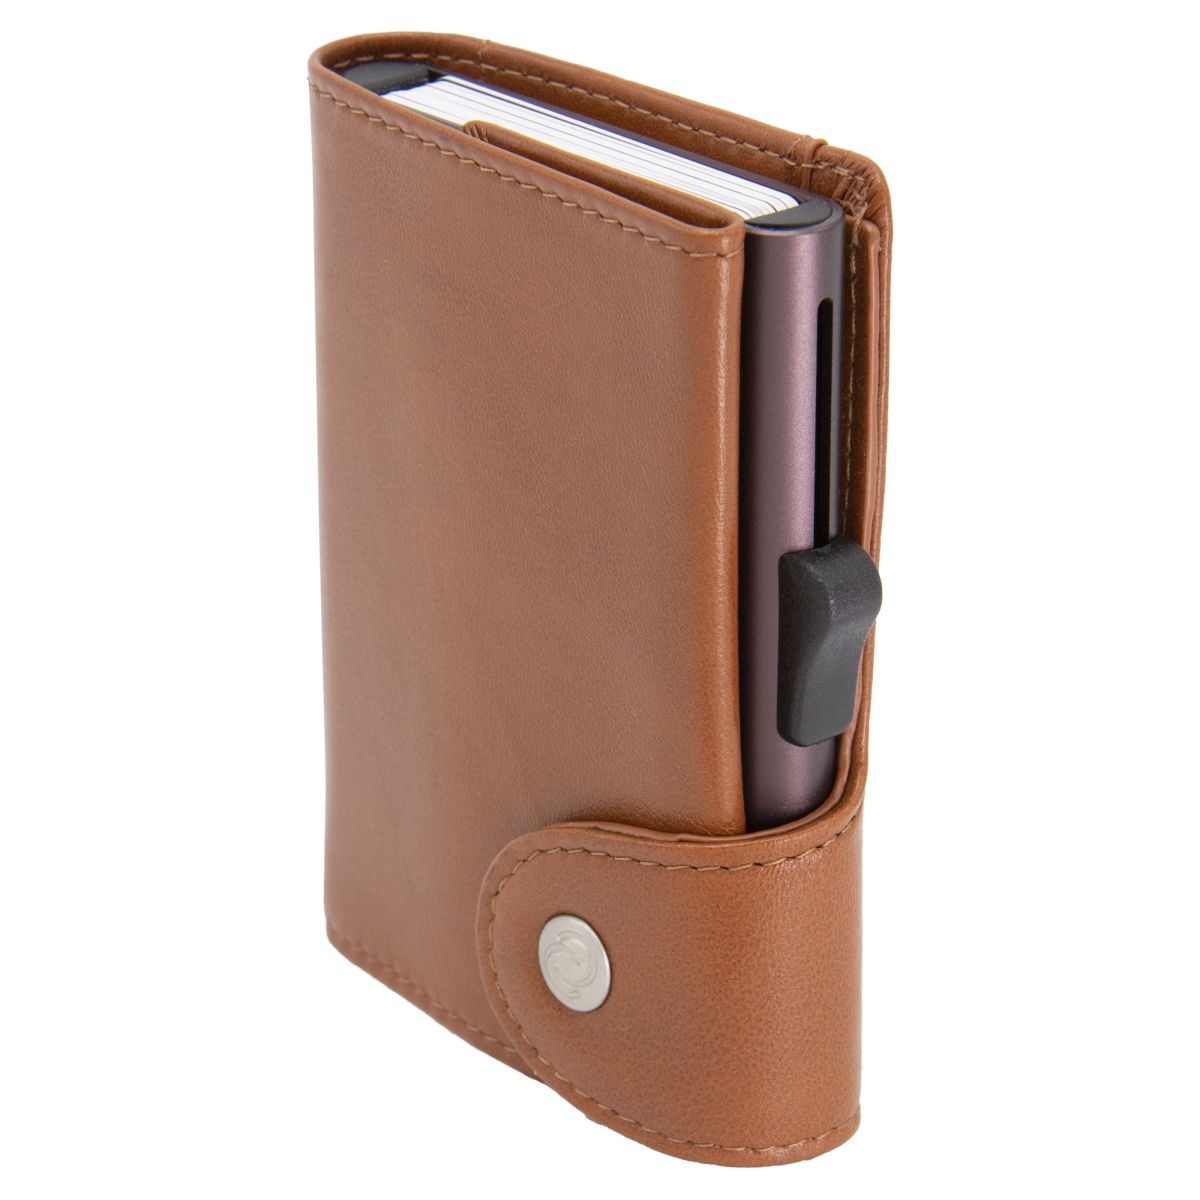 C-Secure XL Aluminum Wallet with Genuine Leather - Chestnut Brown